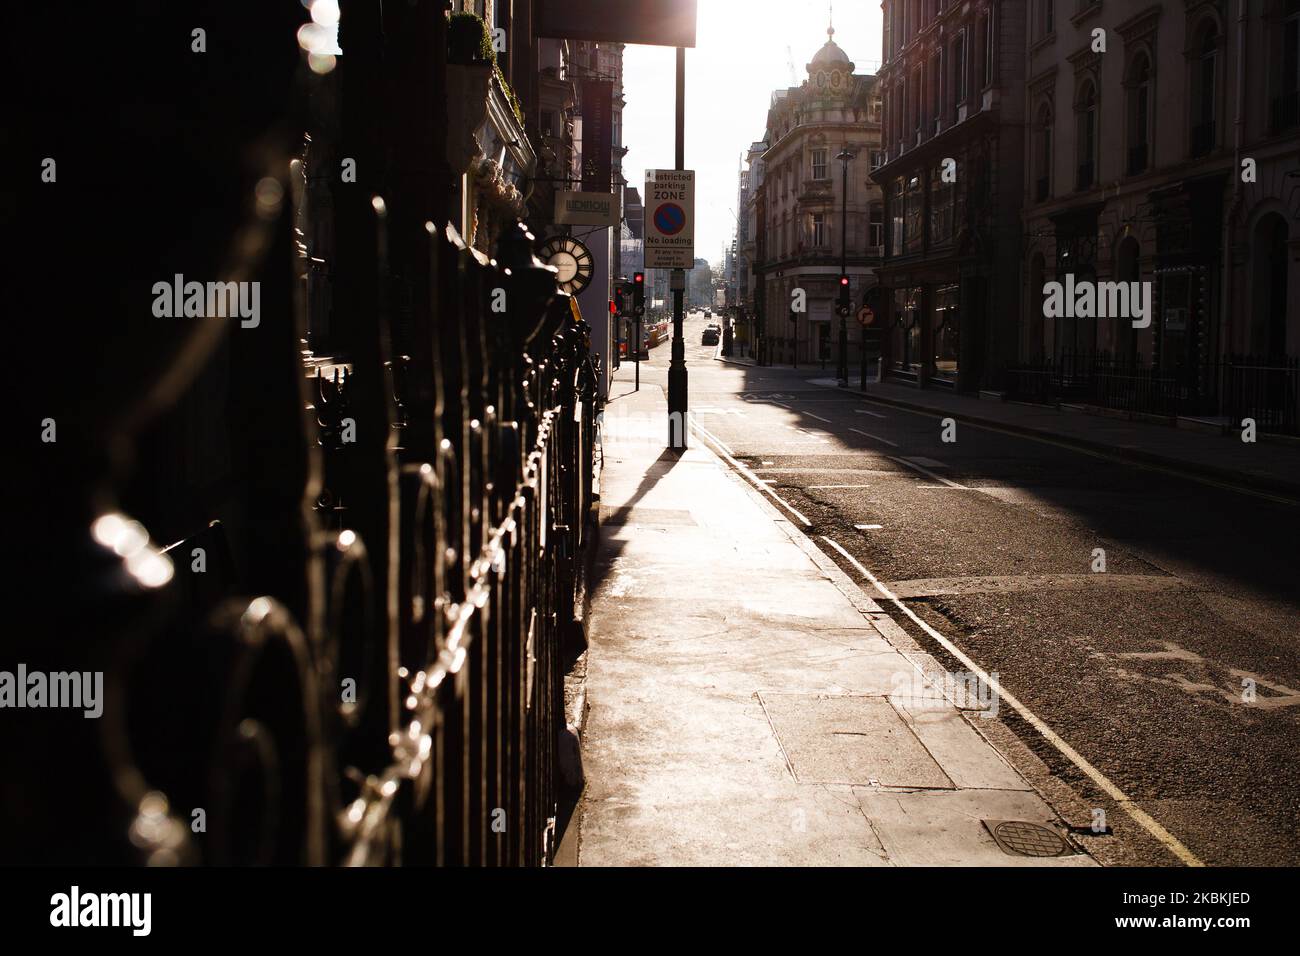 Late afternoon sunlight shines on a deserted Maddox Street in the upmarket Mayfair district of London, England, on March 26, 2020. According to the latest daily figures a total of 578 people have so far died across the UK after testing positive for the covid-19 coronavirus. Hospitals in London, where around a third of cases have been diagnosed, are under particular strain. One senior hospital figure, Chris Hopson of the group NHS Providers, warned today of a 'tsunami' of cases to hit hospitals in the capital over the coming weeks. (Photo by David Cliff/NurPhoto) Stock Photo